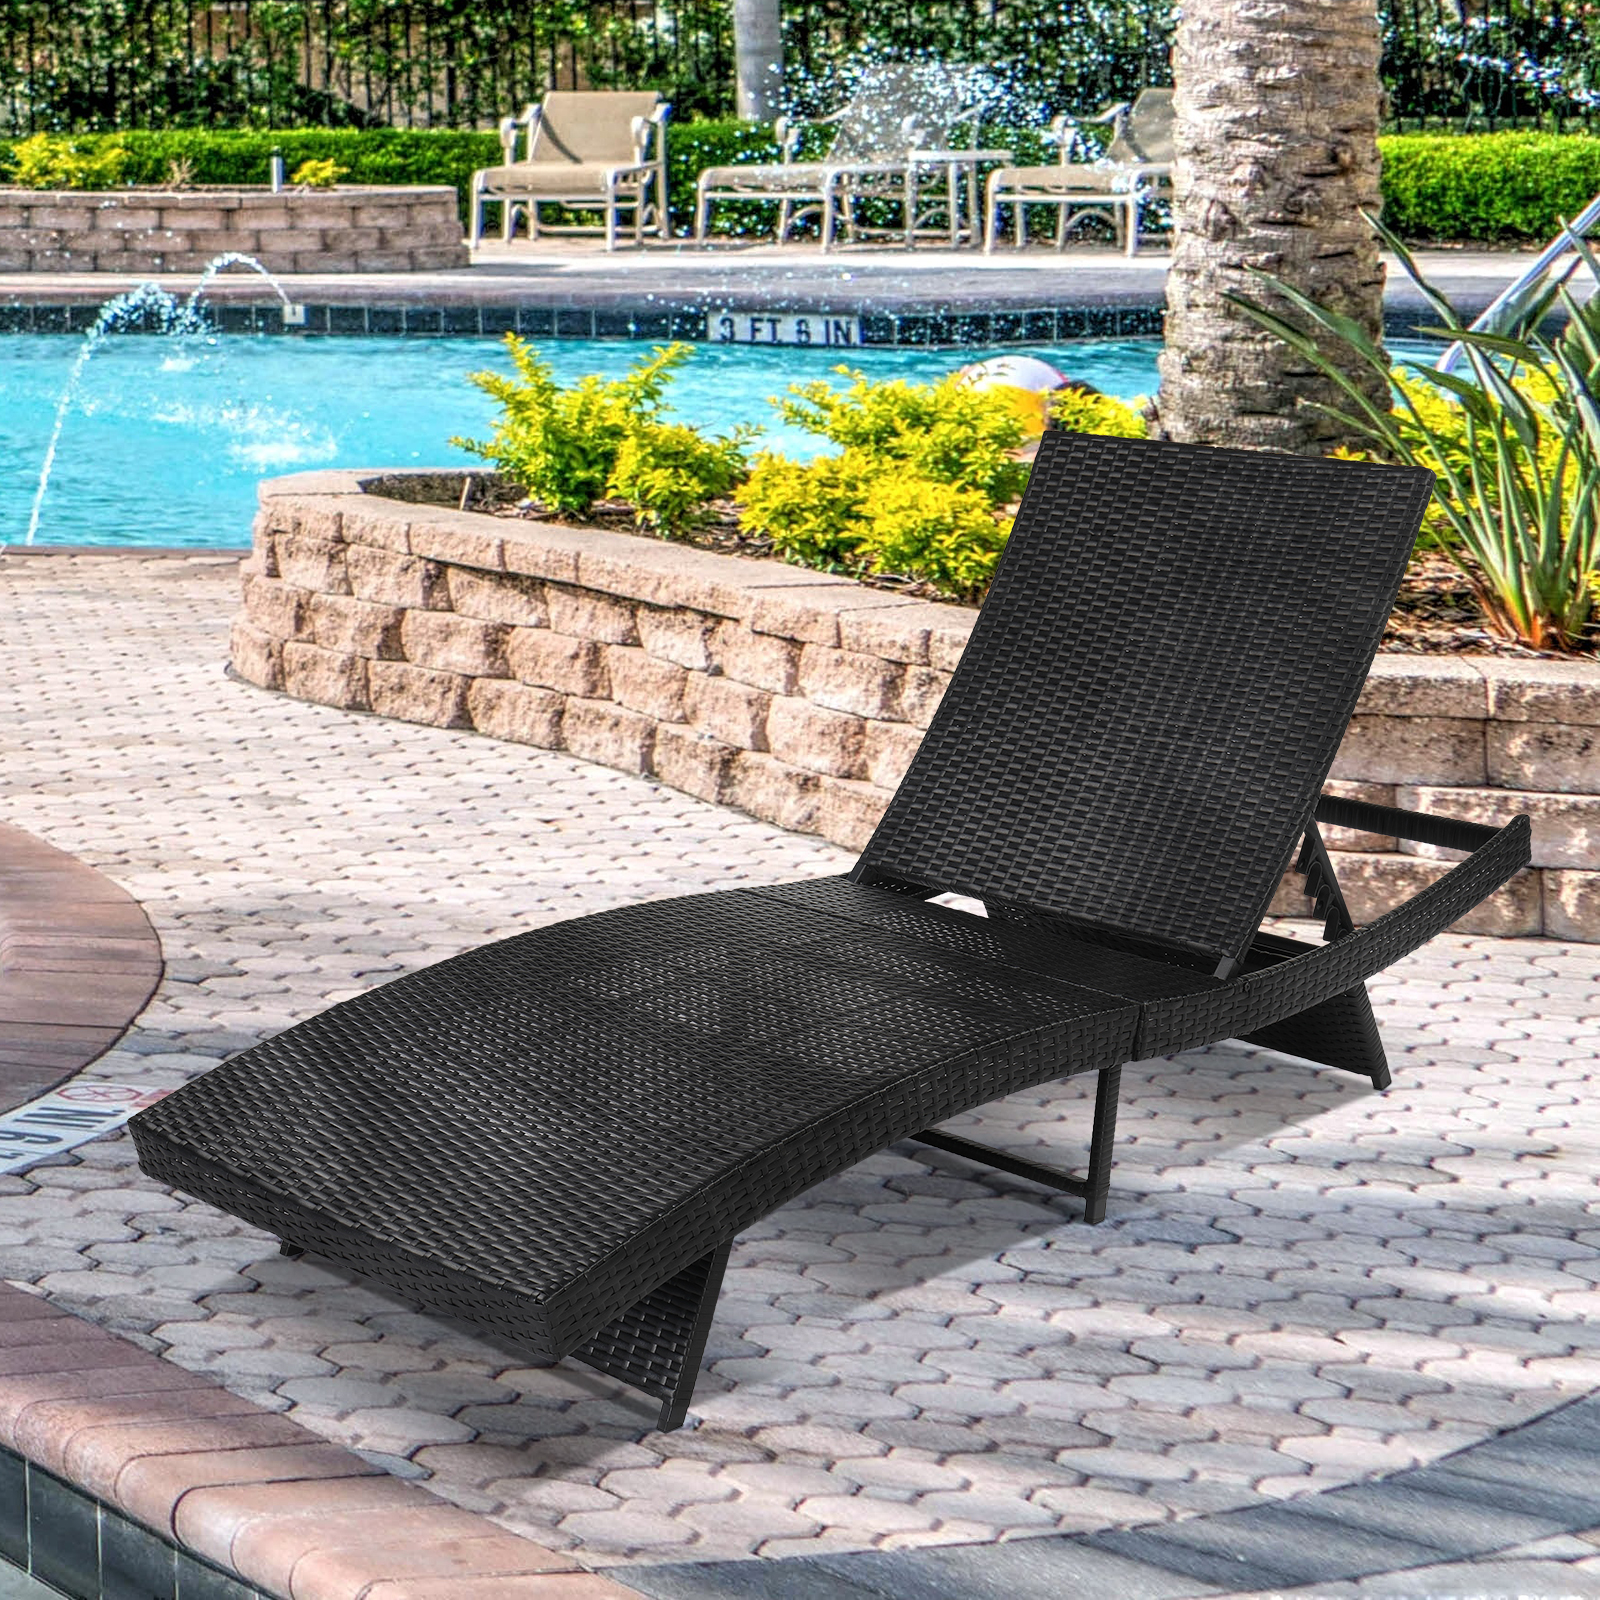 Patio Chaise Lounge Furniture, 5-Position Adjustable Cushioned Rattan Chaise, PE Wicker Backrest Lounger Chair, Suitable for Pool Balcony Deck Yard Garden, B33 - image 2 of 9